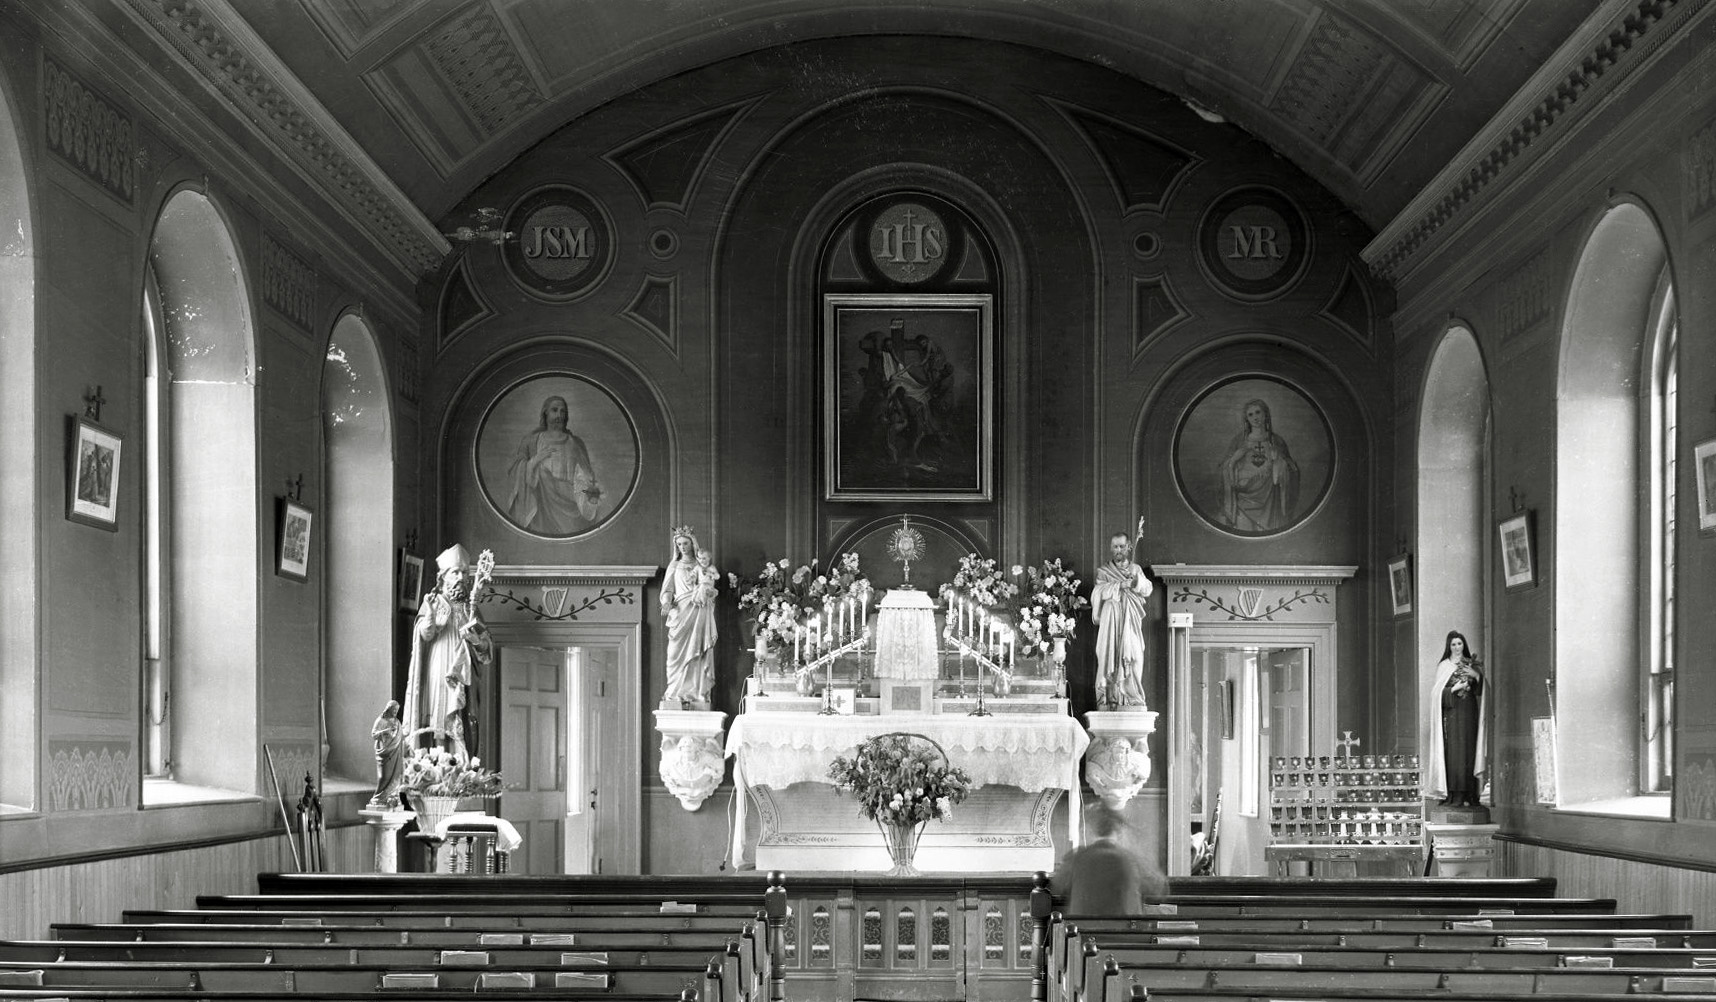 Interior of unknown church or date. People need to record better than they did. Still a neat interior shot. From my negatives collection. View full size.